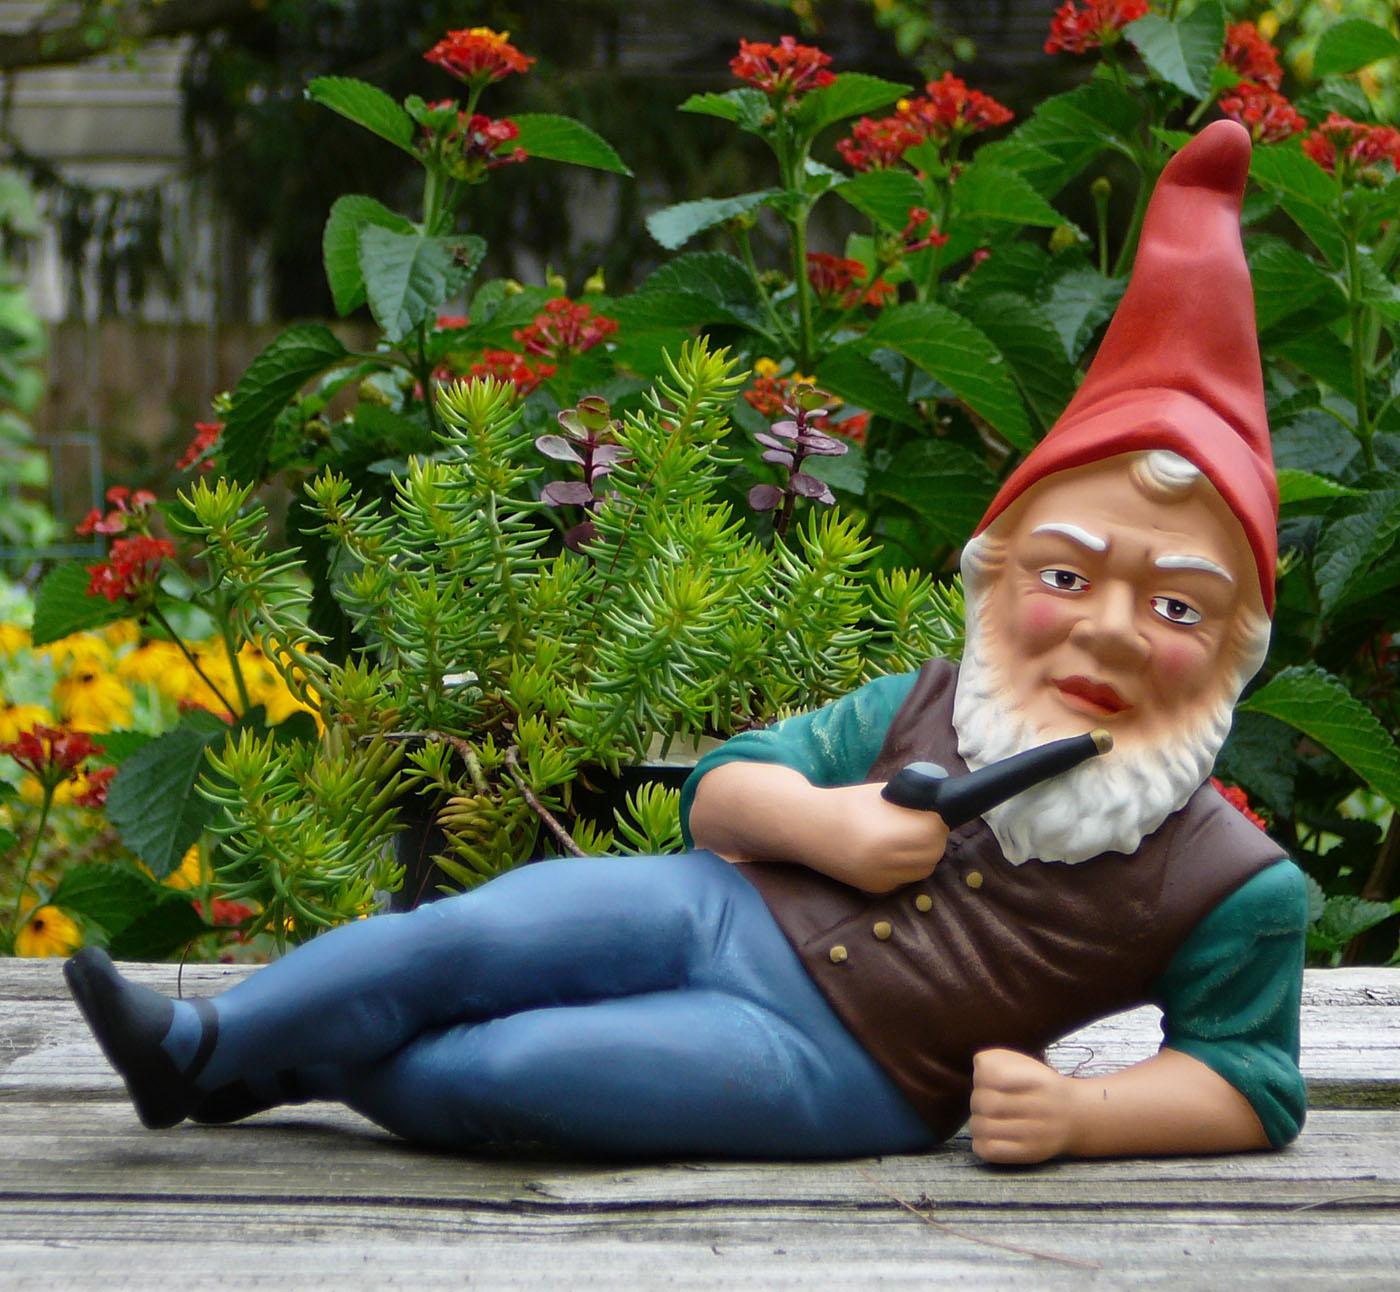 Gnomes are the creatures of woodland legend representing the earth, and they make a fun addition to Mississippi gardens. (Photo courtesy of Wikimedia Commons)